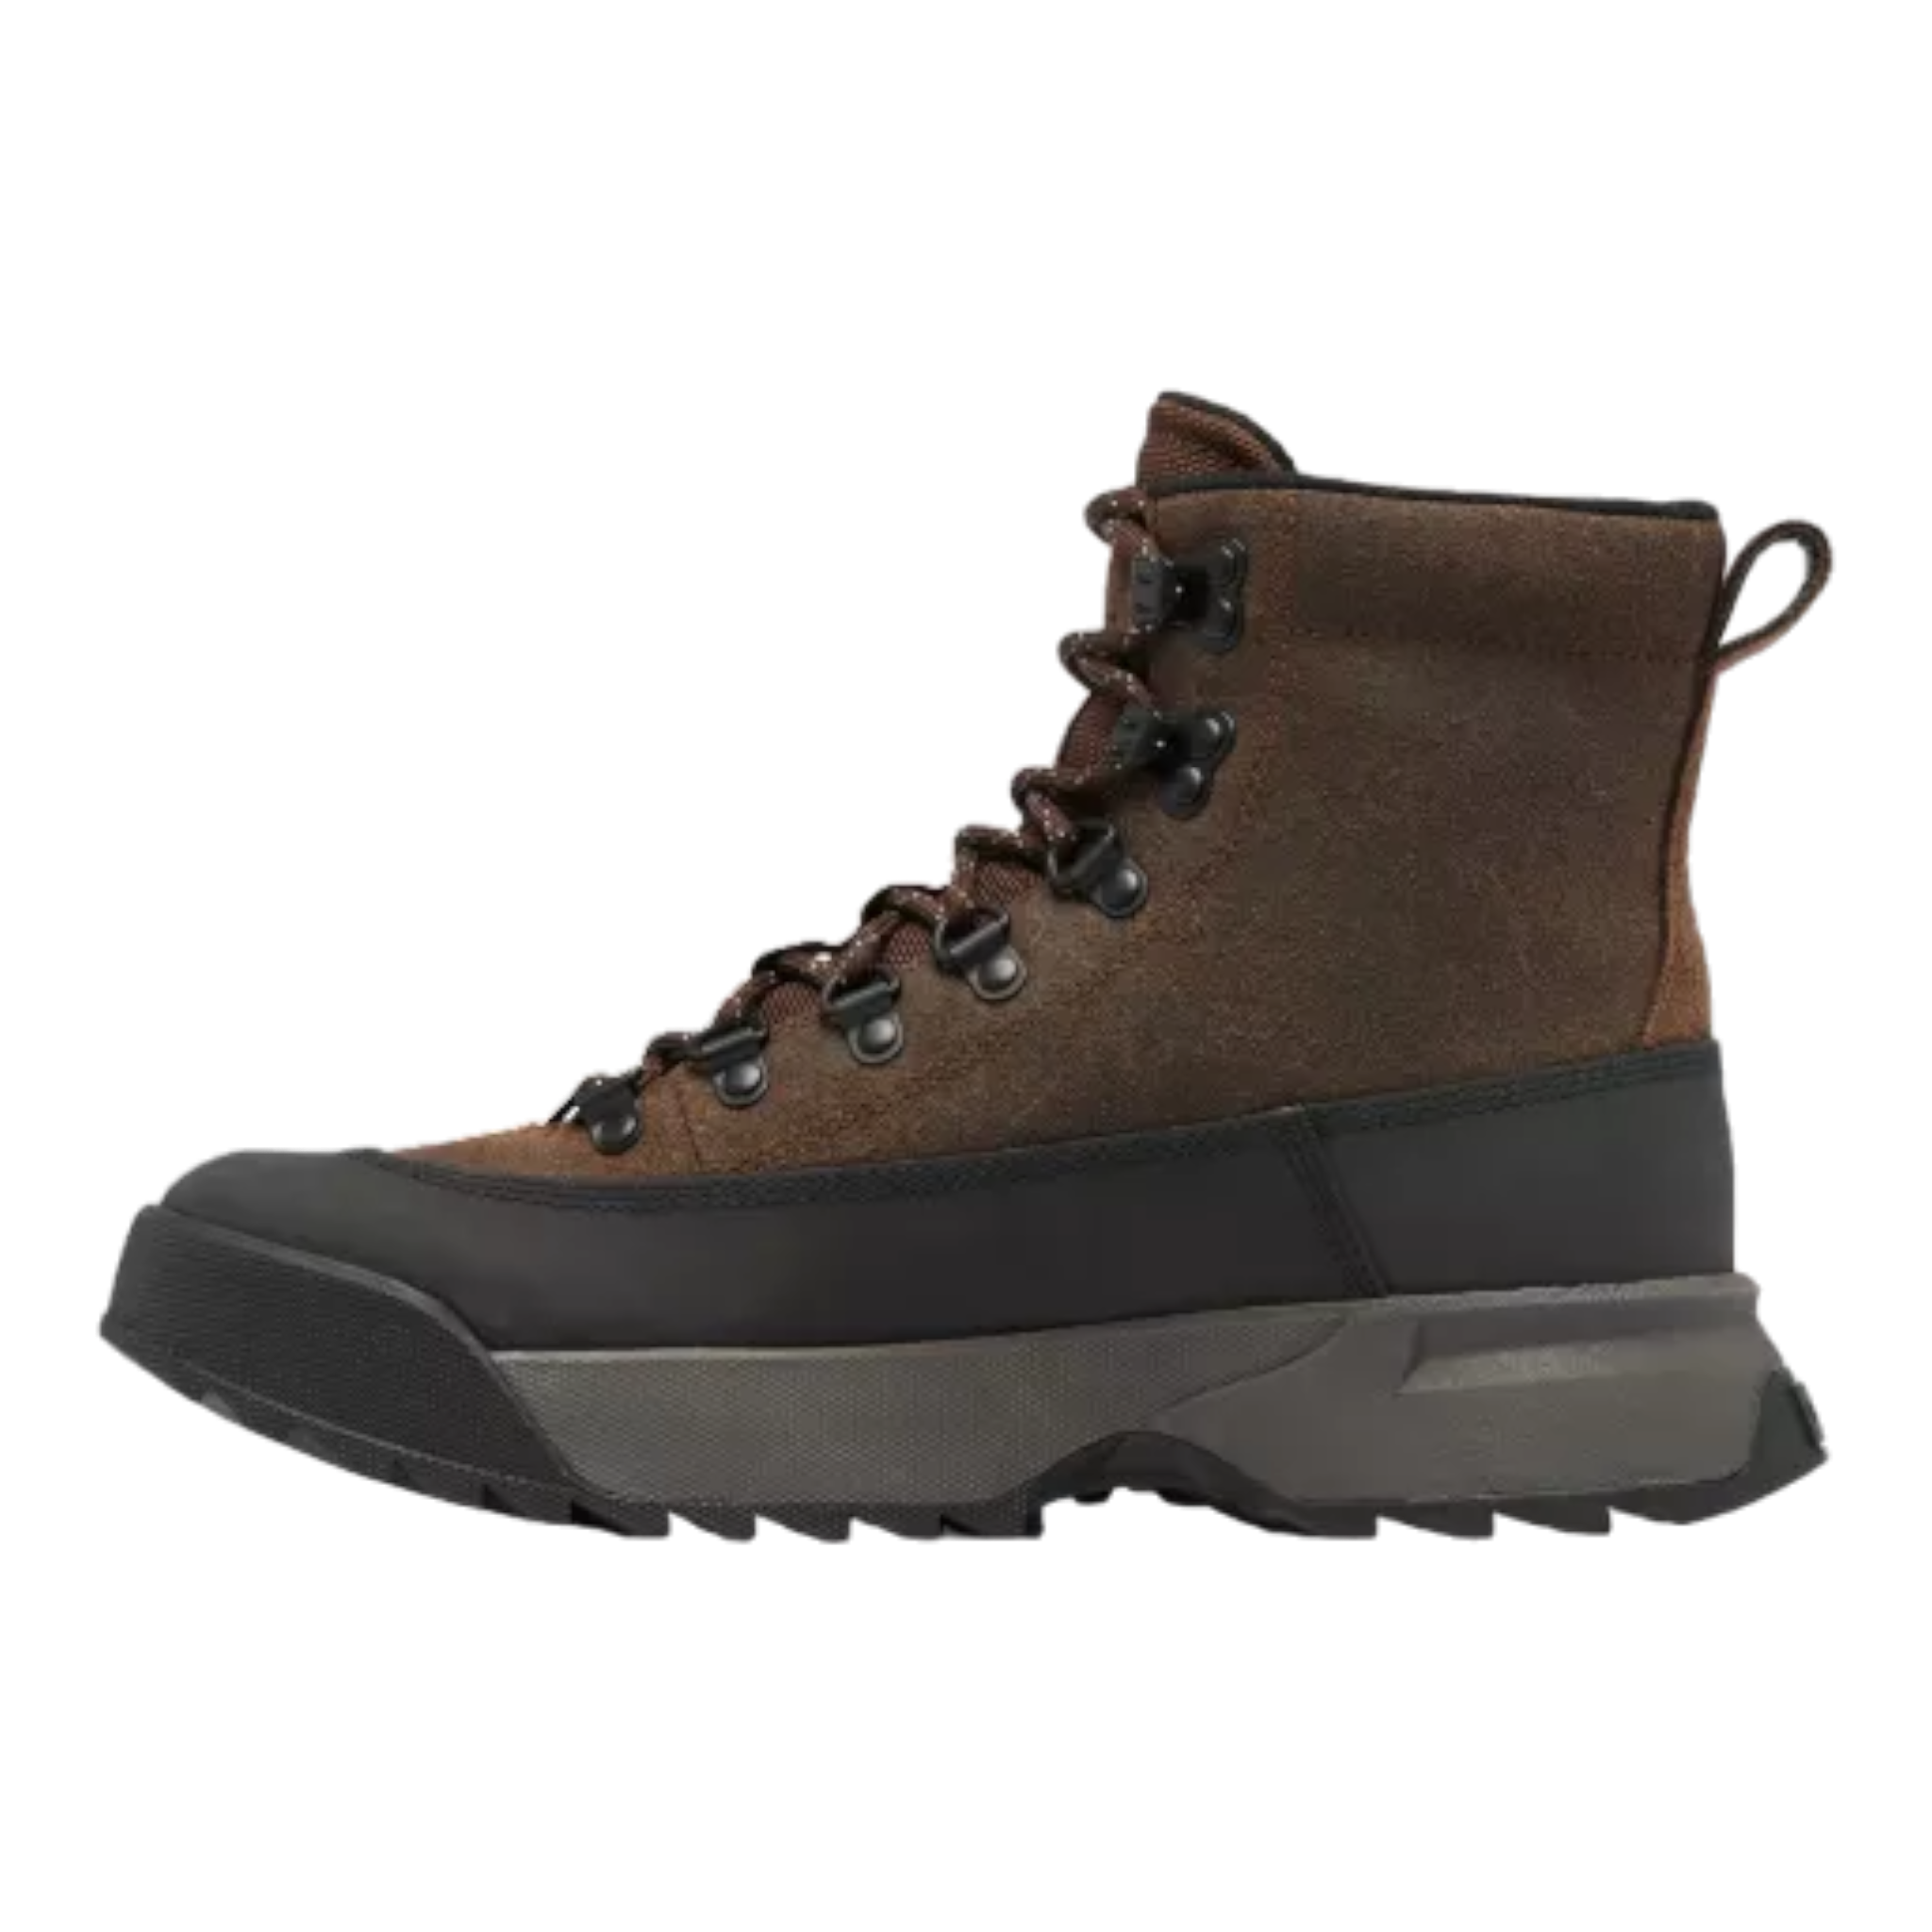 Scout 87'™ Pro Boot - Dardano's Shoes